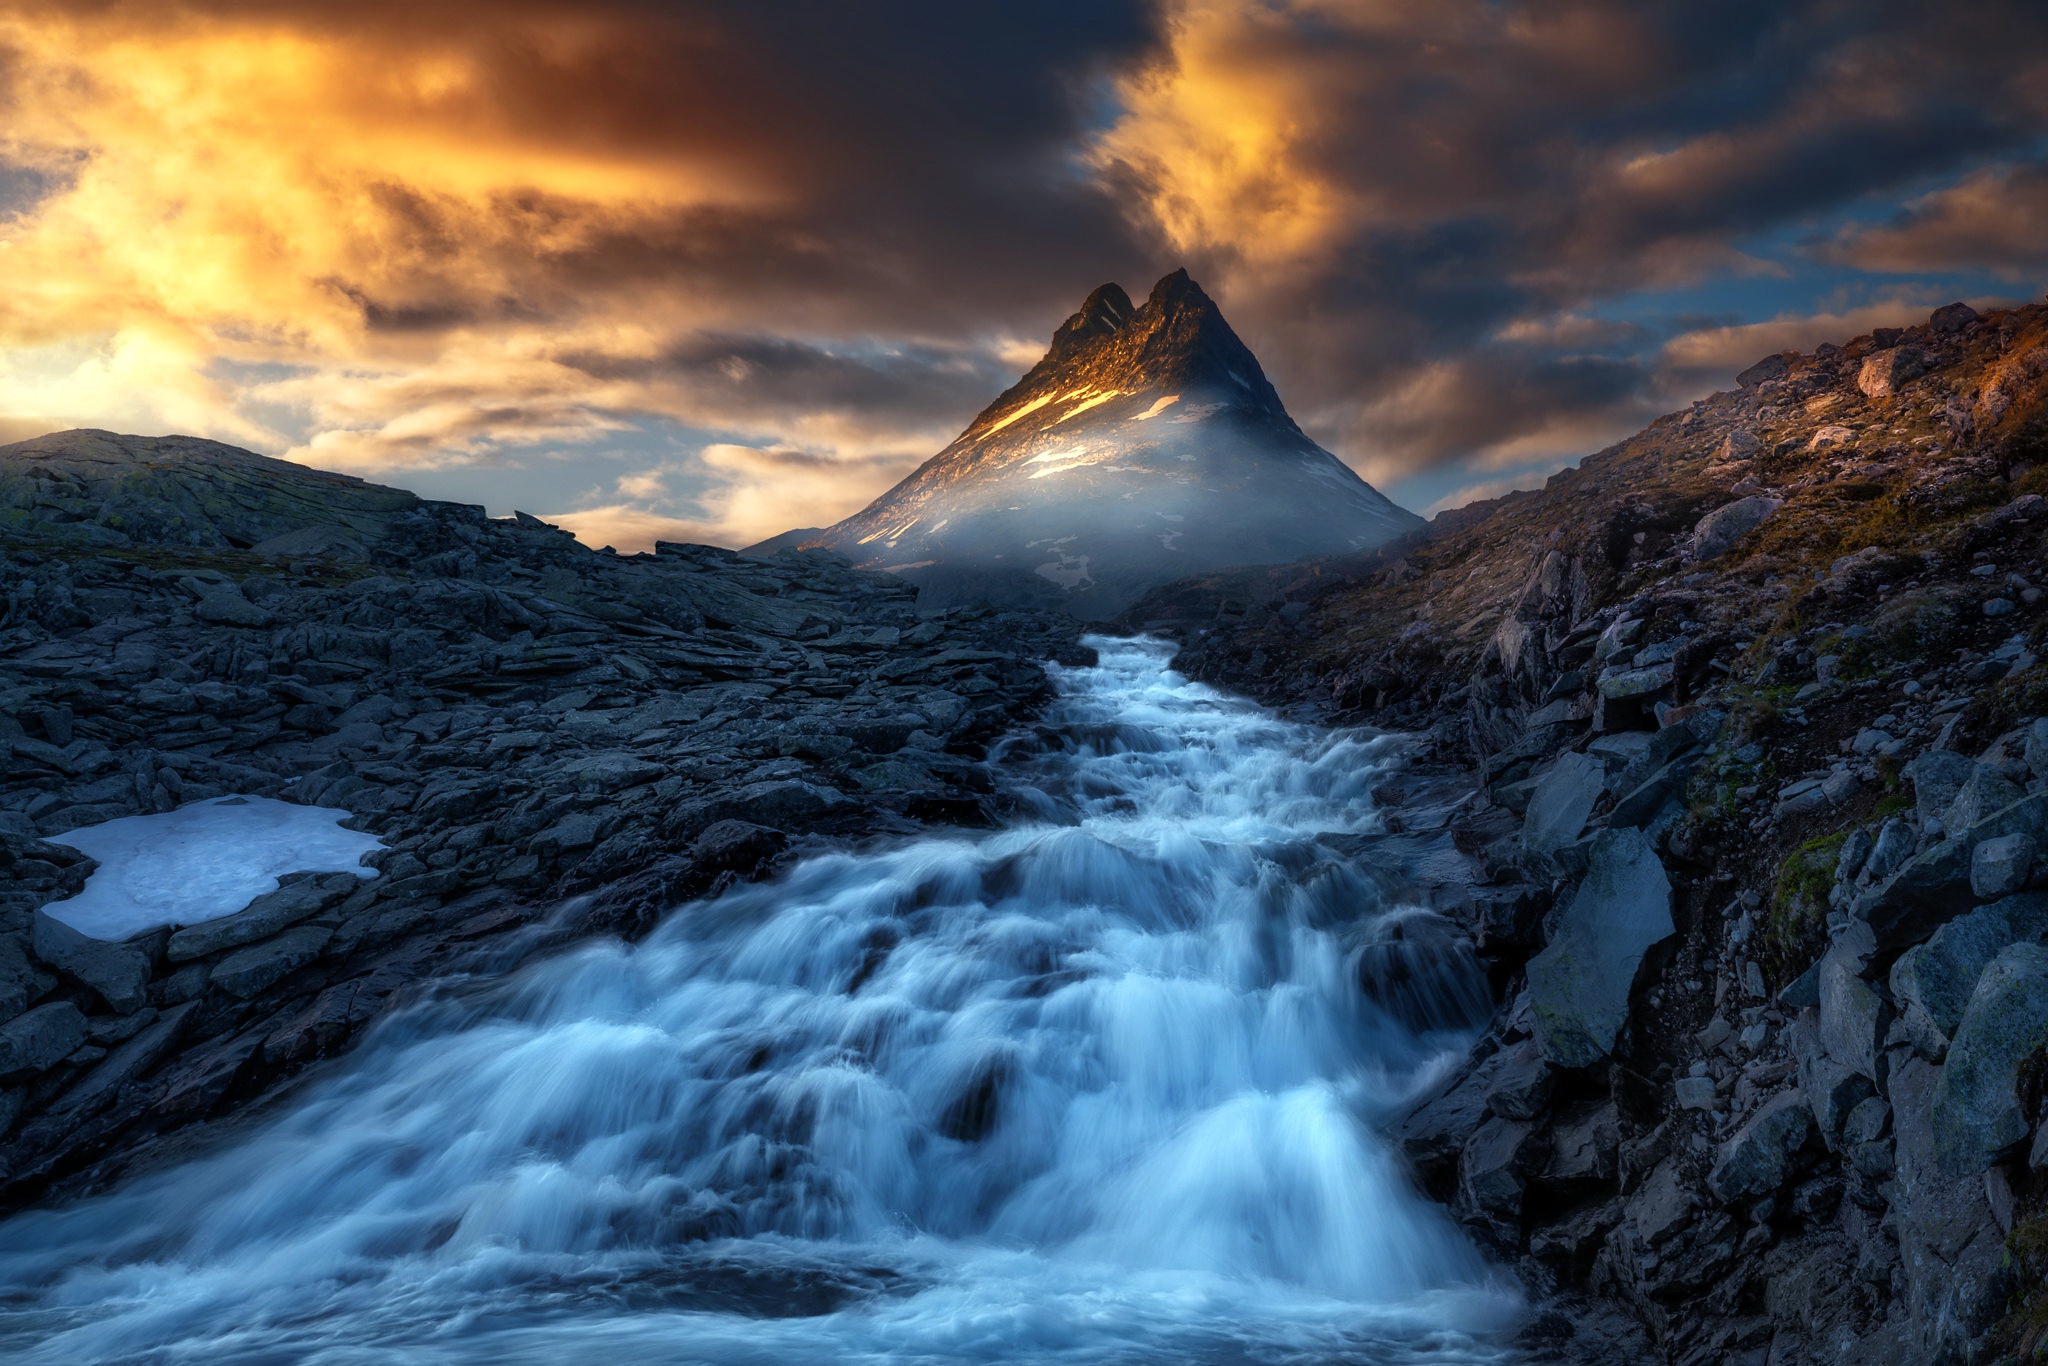 General 2048x1366 mountains Norway water nature sky